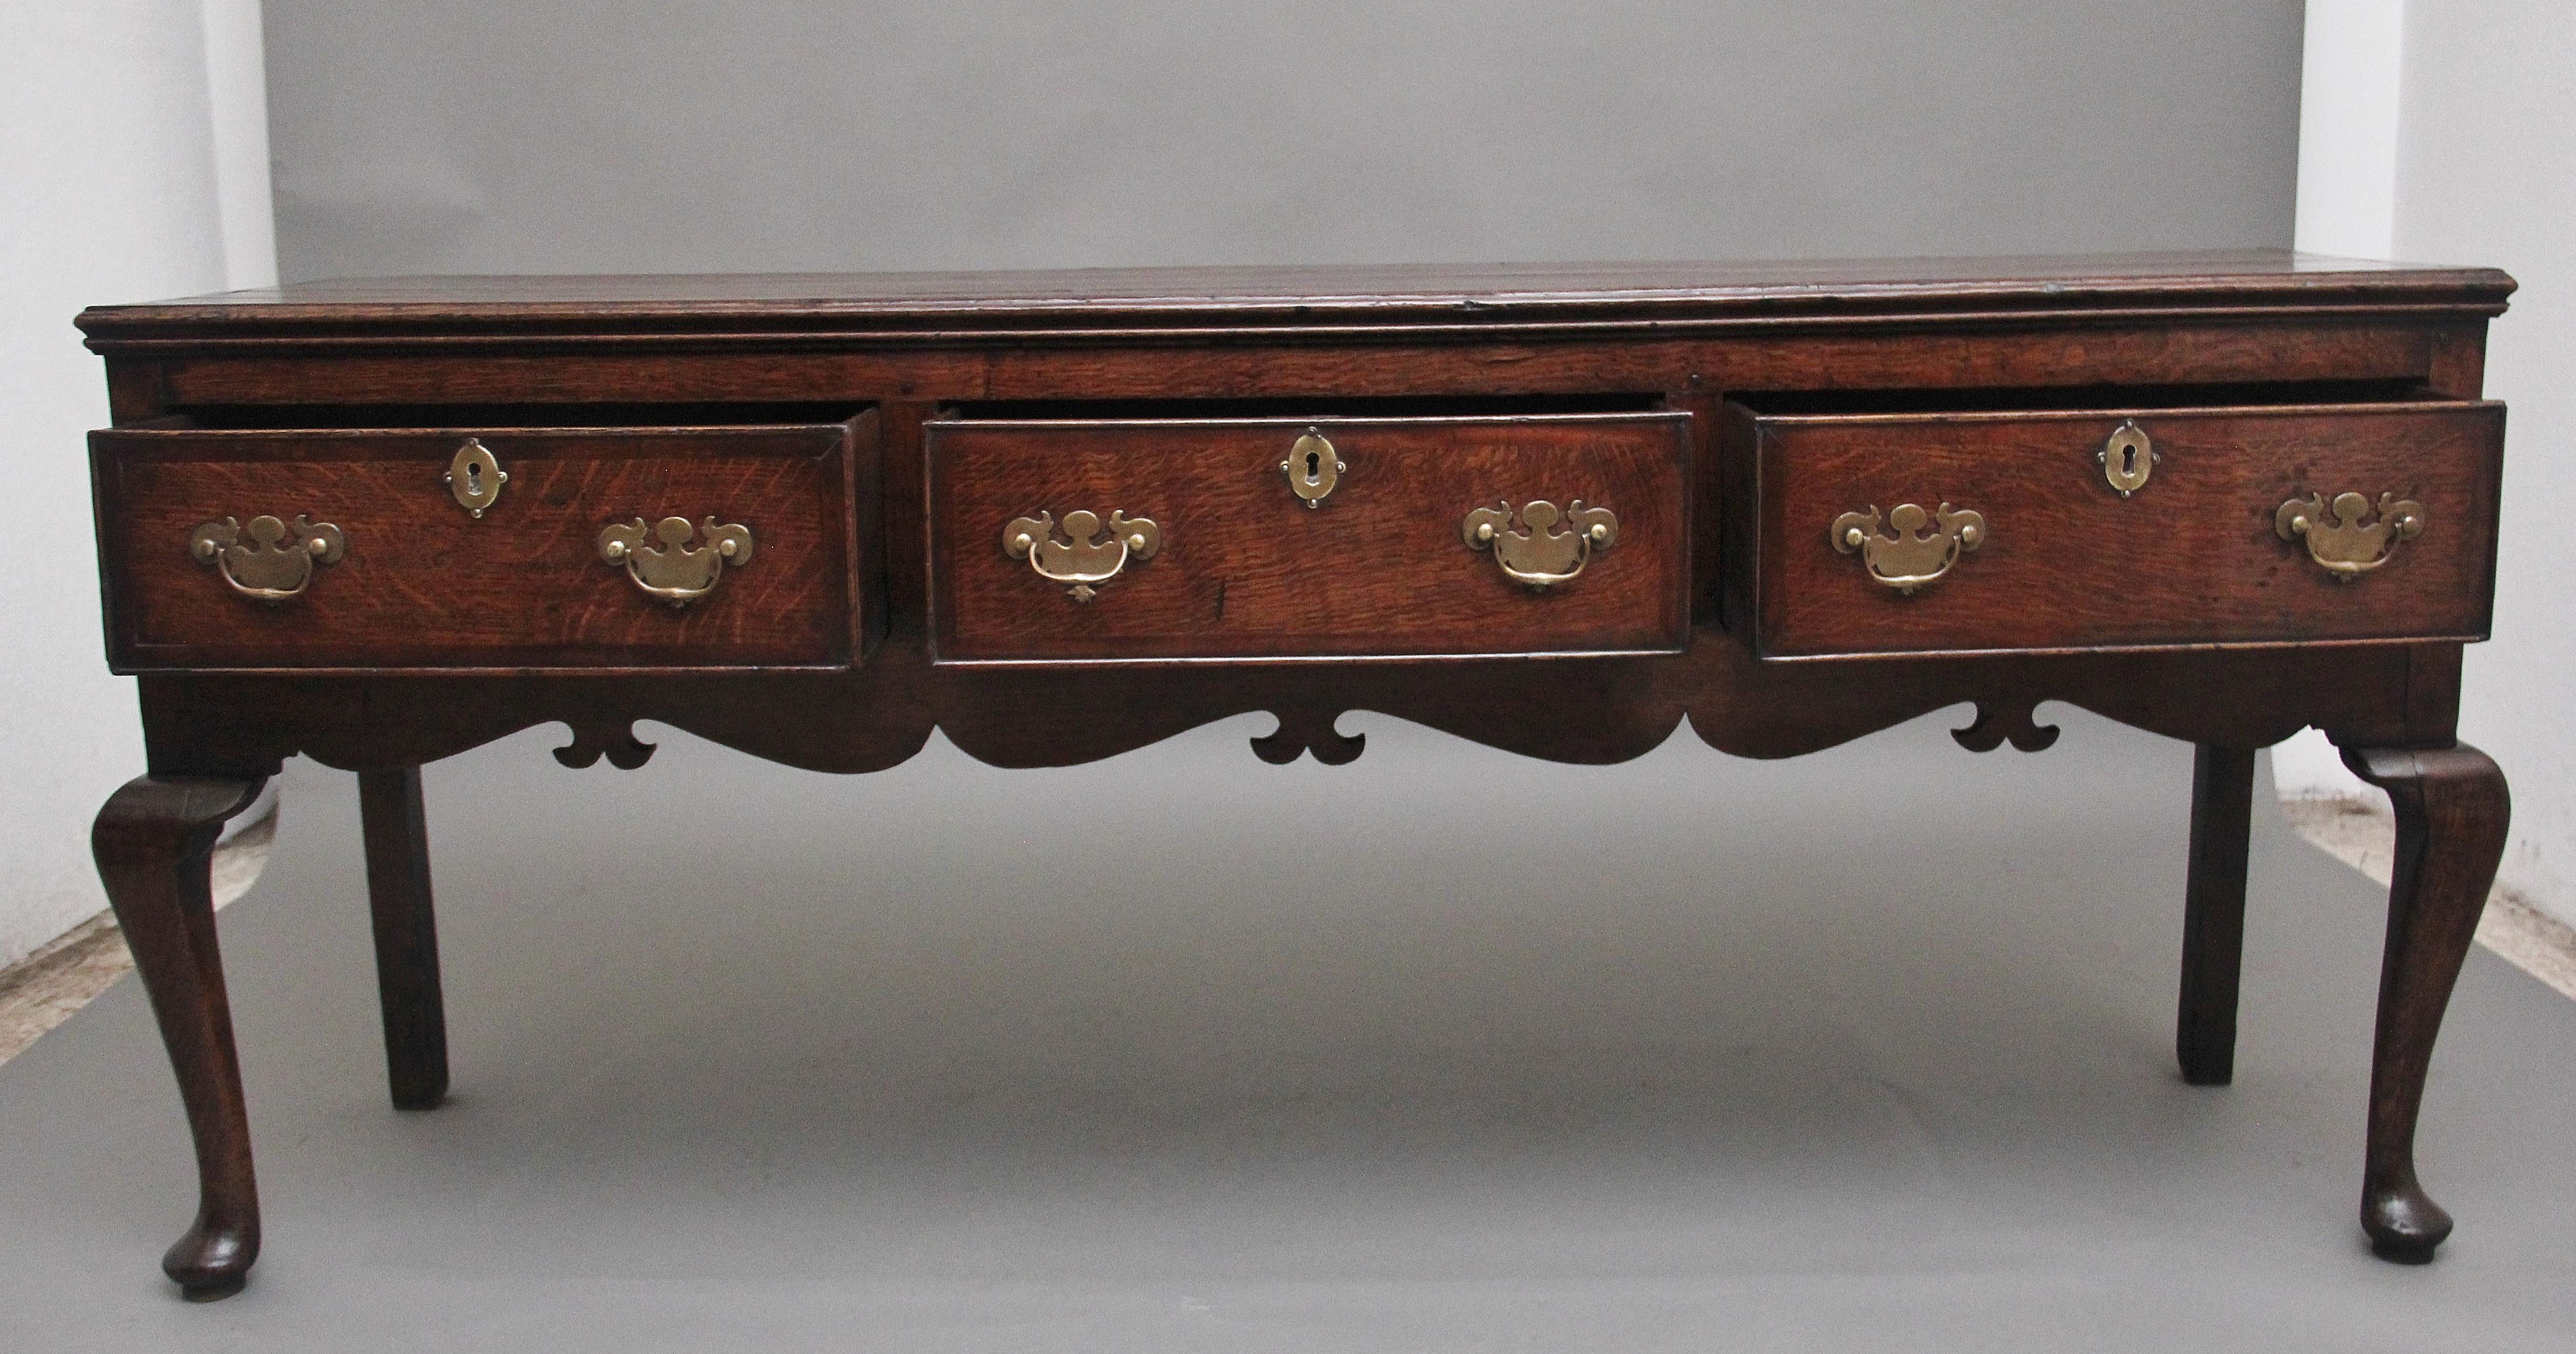 A superb quality 18th Century oak dresser base, having a lovely figured and moulded edge top above three deep drawers with the original brass plate handles and escutcheons, lovely figuration on the drawer fronts, decorative shaped frieze below and